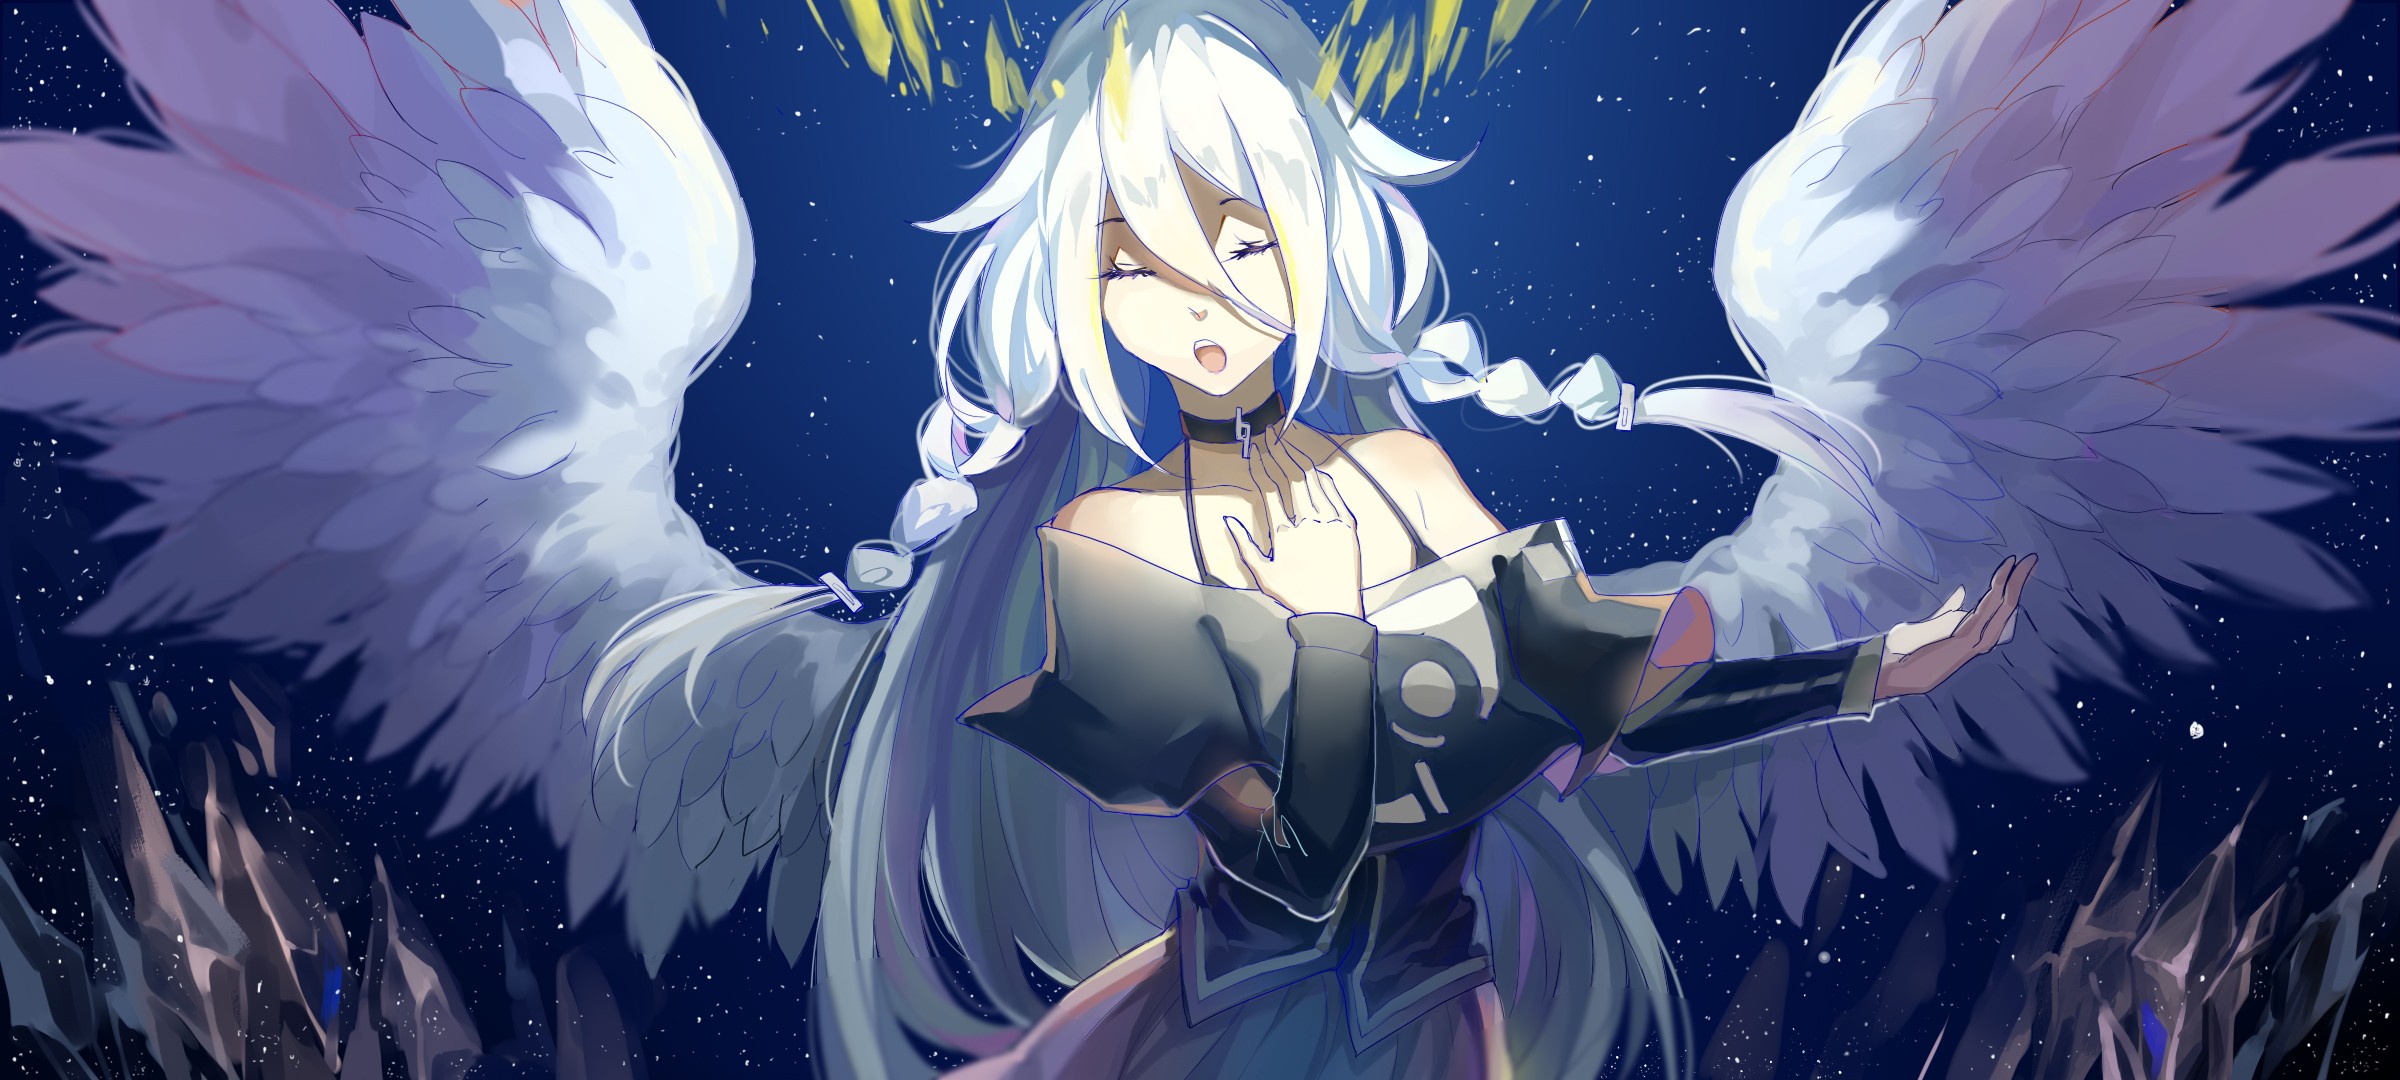 Wallpaper, anime girls, IA Vocaloid, feathers, wings, singer, singing, blue background, white hair, night, open mouth 2400x1080